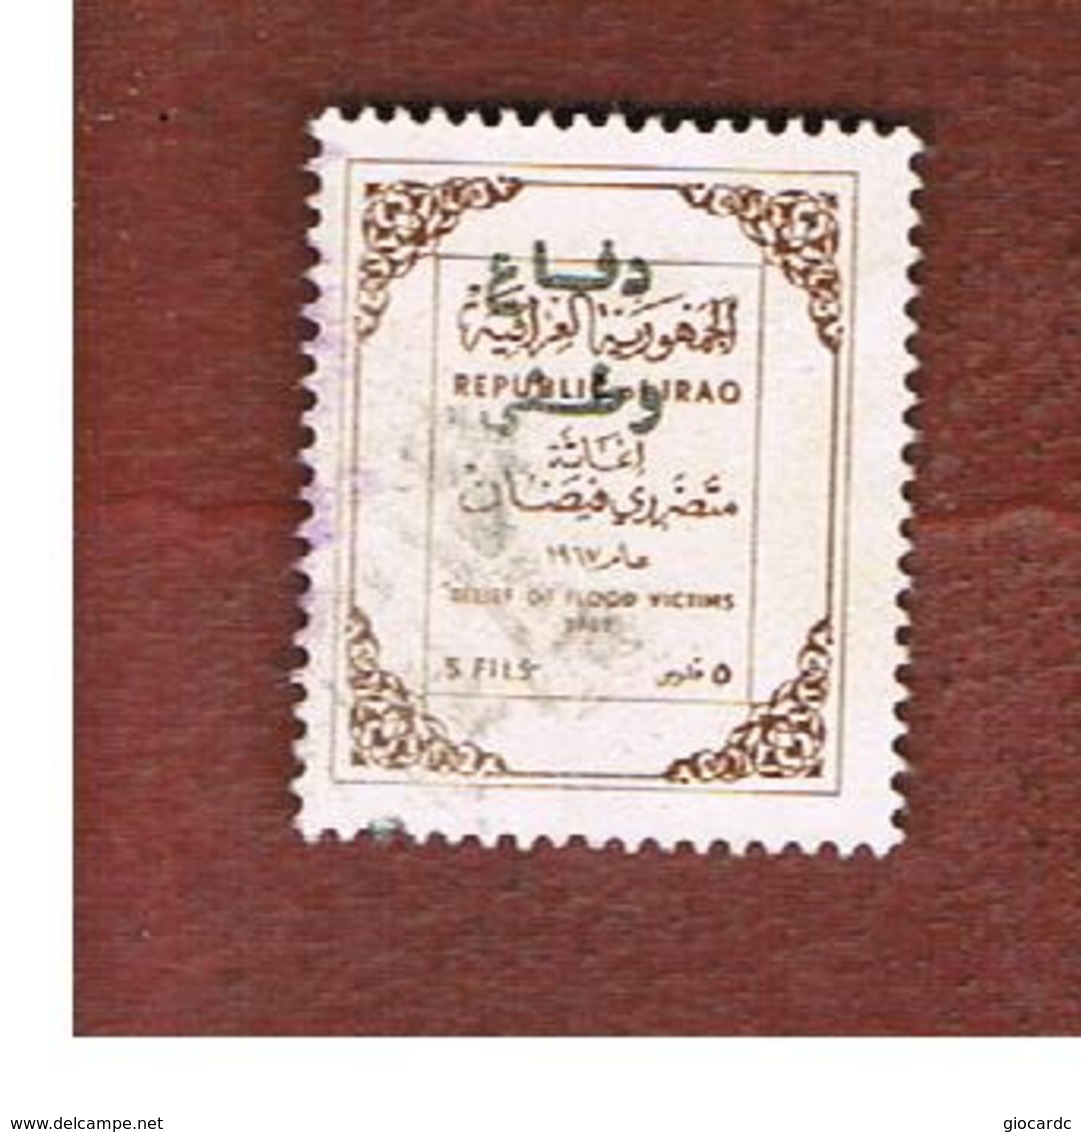 IRAQ    -  SG T764  -   1968 OBLIGATORY TX: DEFENCE FUND (OVERPRINTED IN ARAB)  - USED ° - Iraq